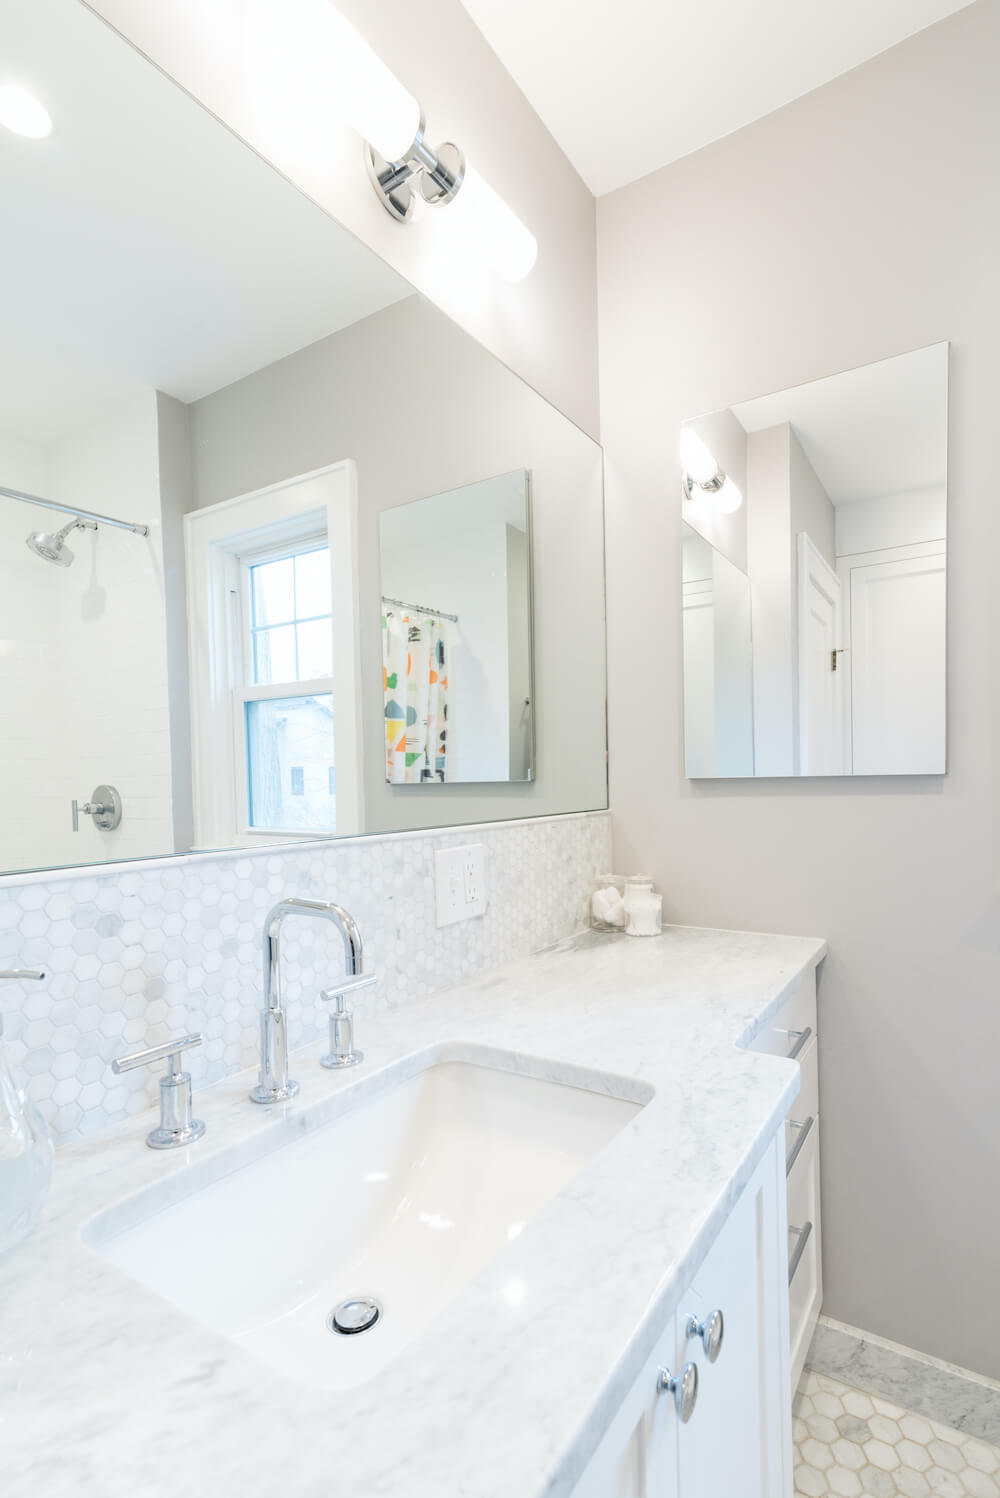 Large white sink with white marble countertop and large vanity mirror below light fixtures after renovation 